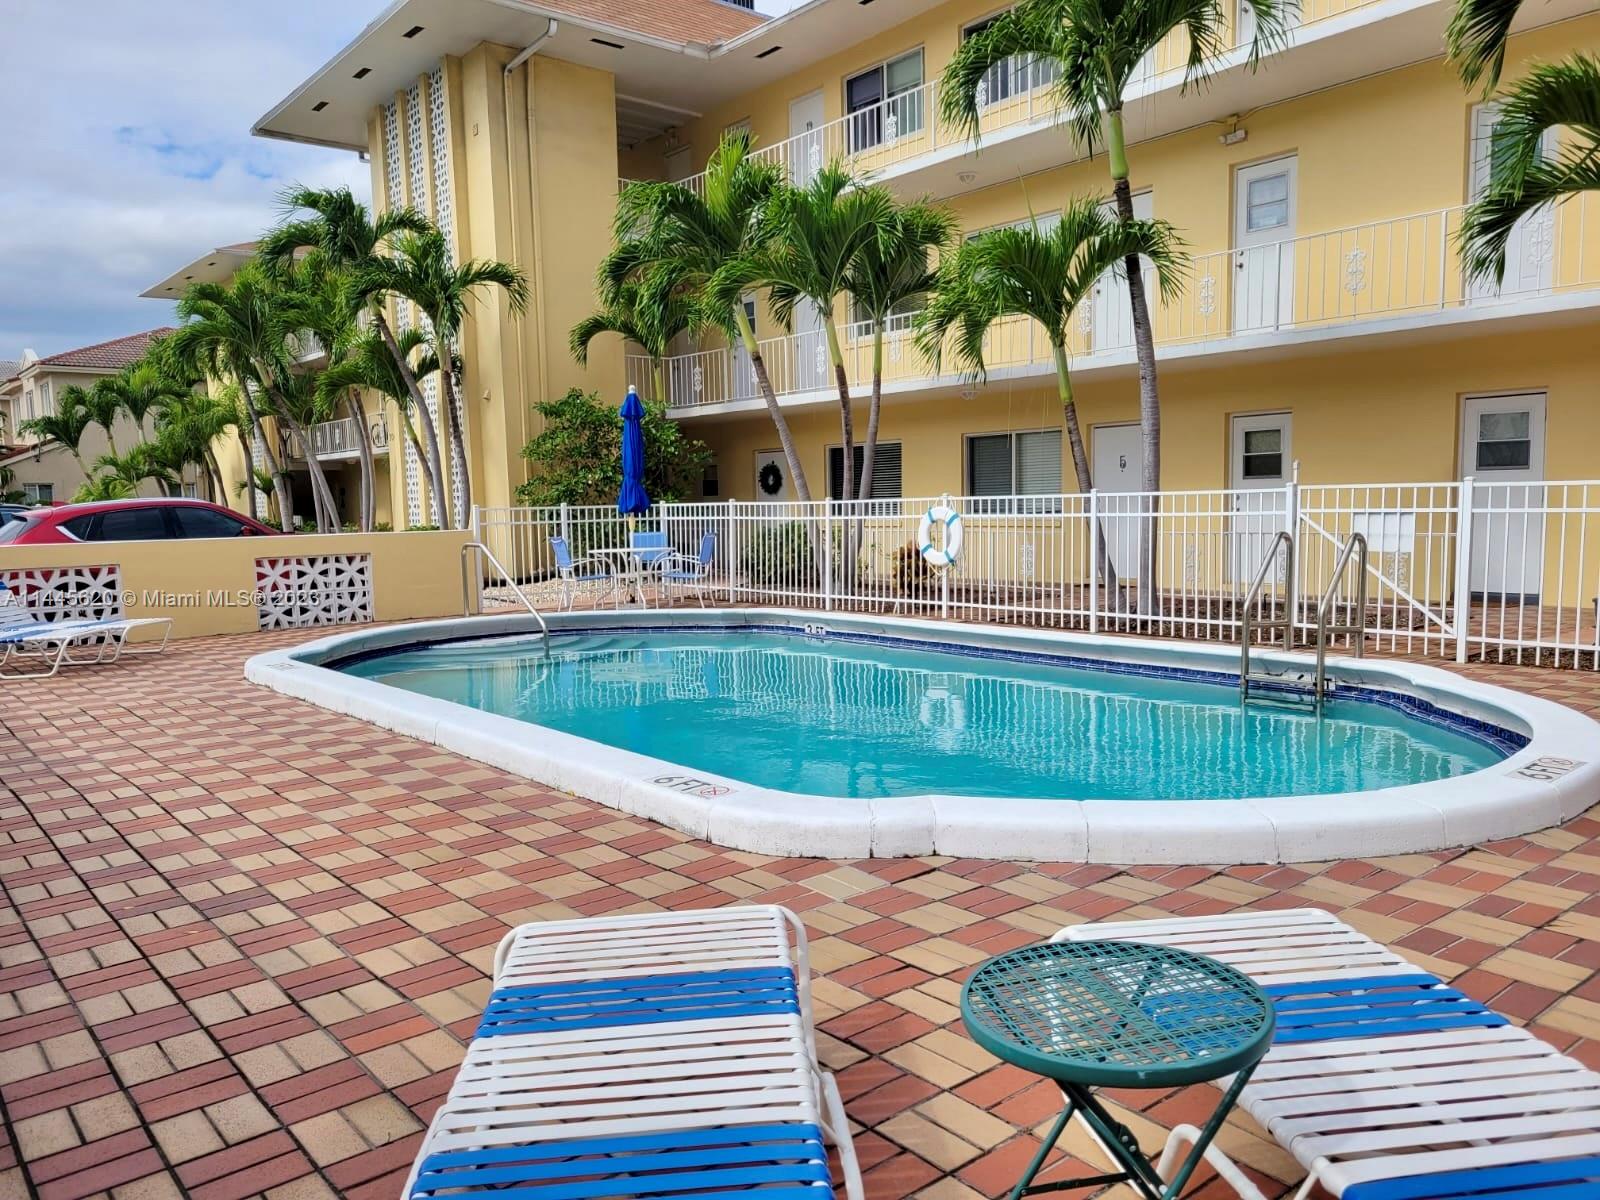 Photo 12 of Hyacinth House Condo Apt 9 in Fort Lauderdale - MLS A11445620